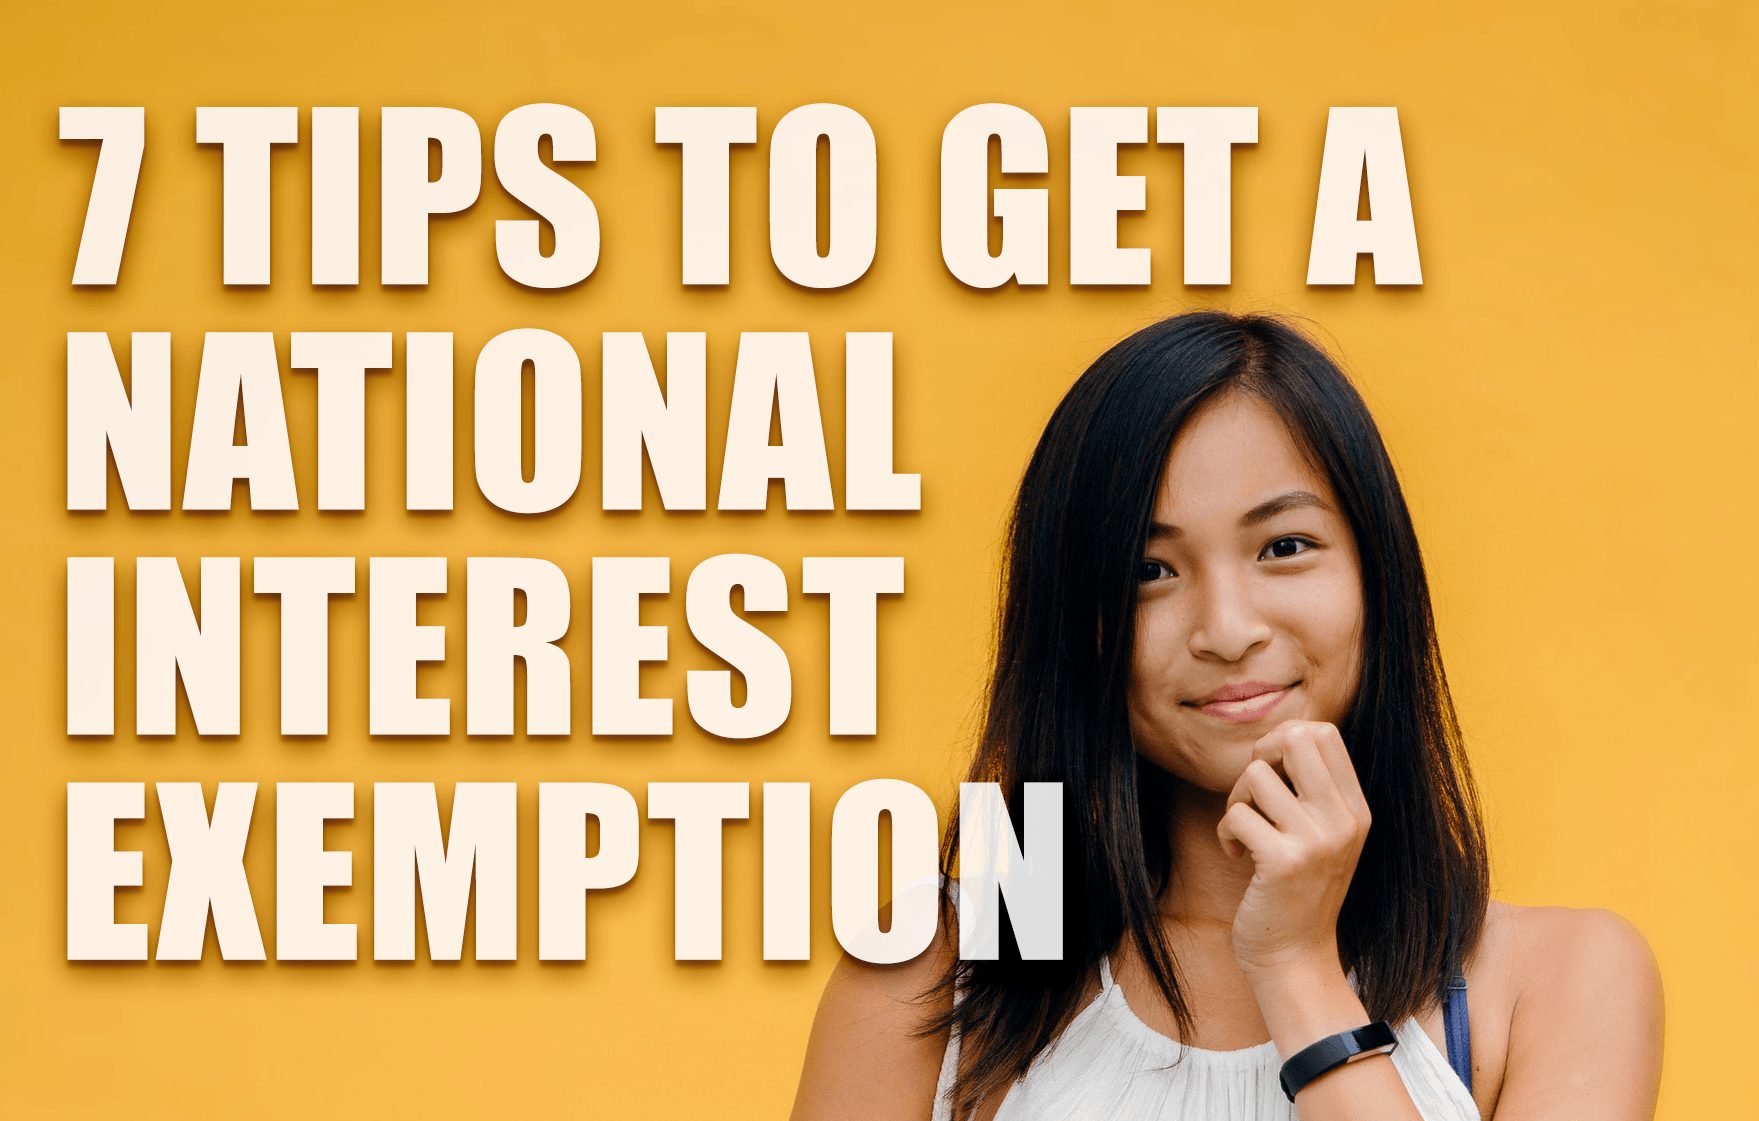 7 Tips To Get A National Interest Exemption